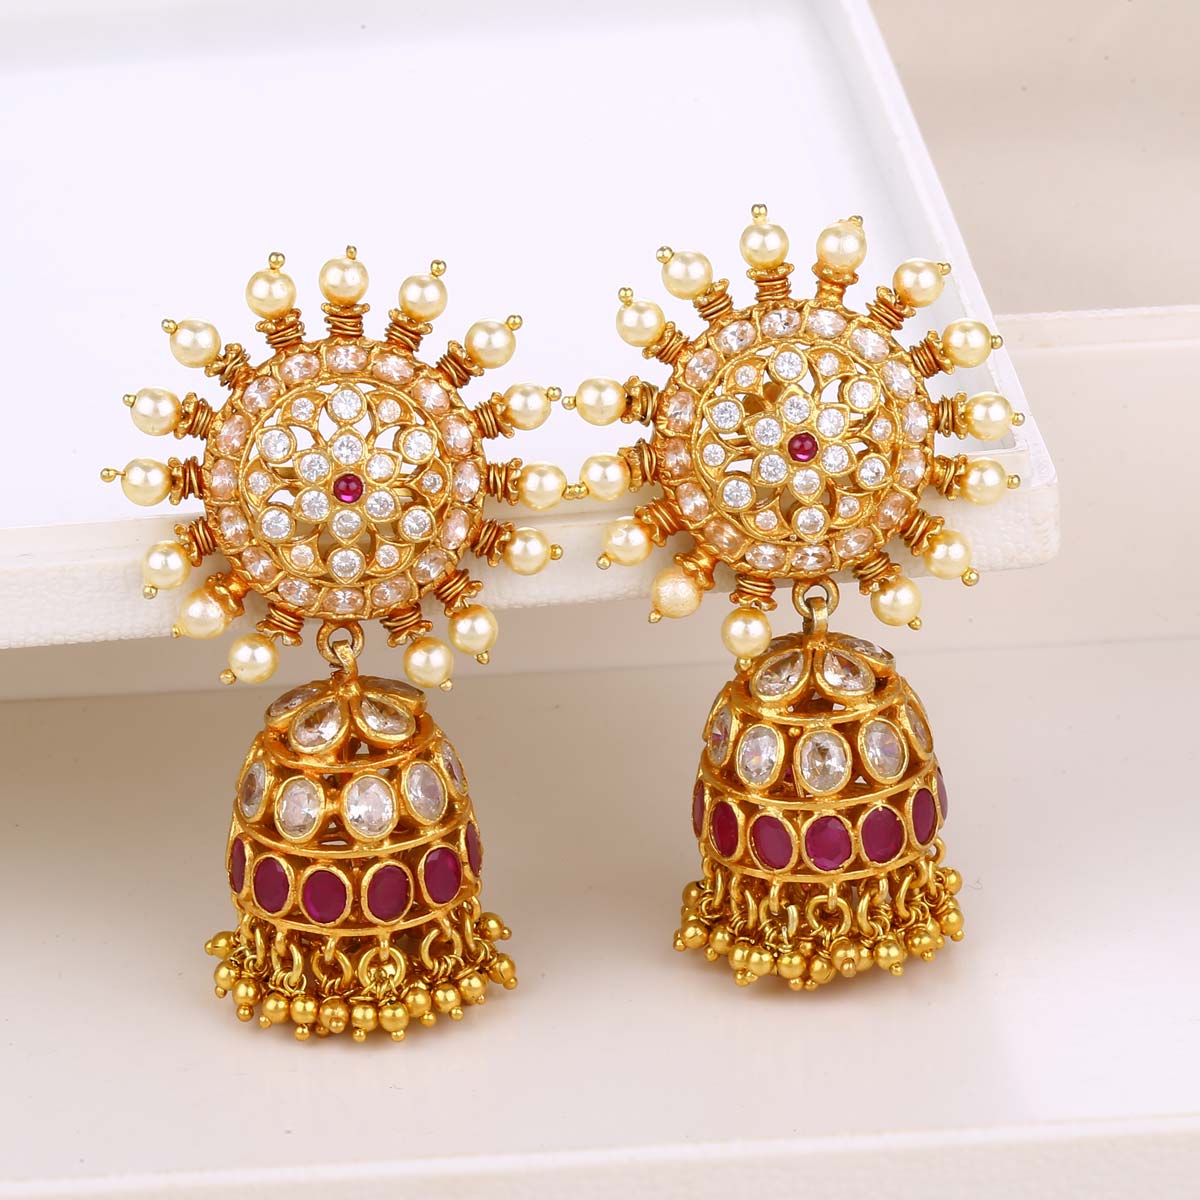 Buy Peach Jewels Handcrafted Brass Earrings online in India at Best Price |  Aachho